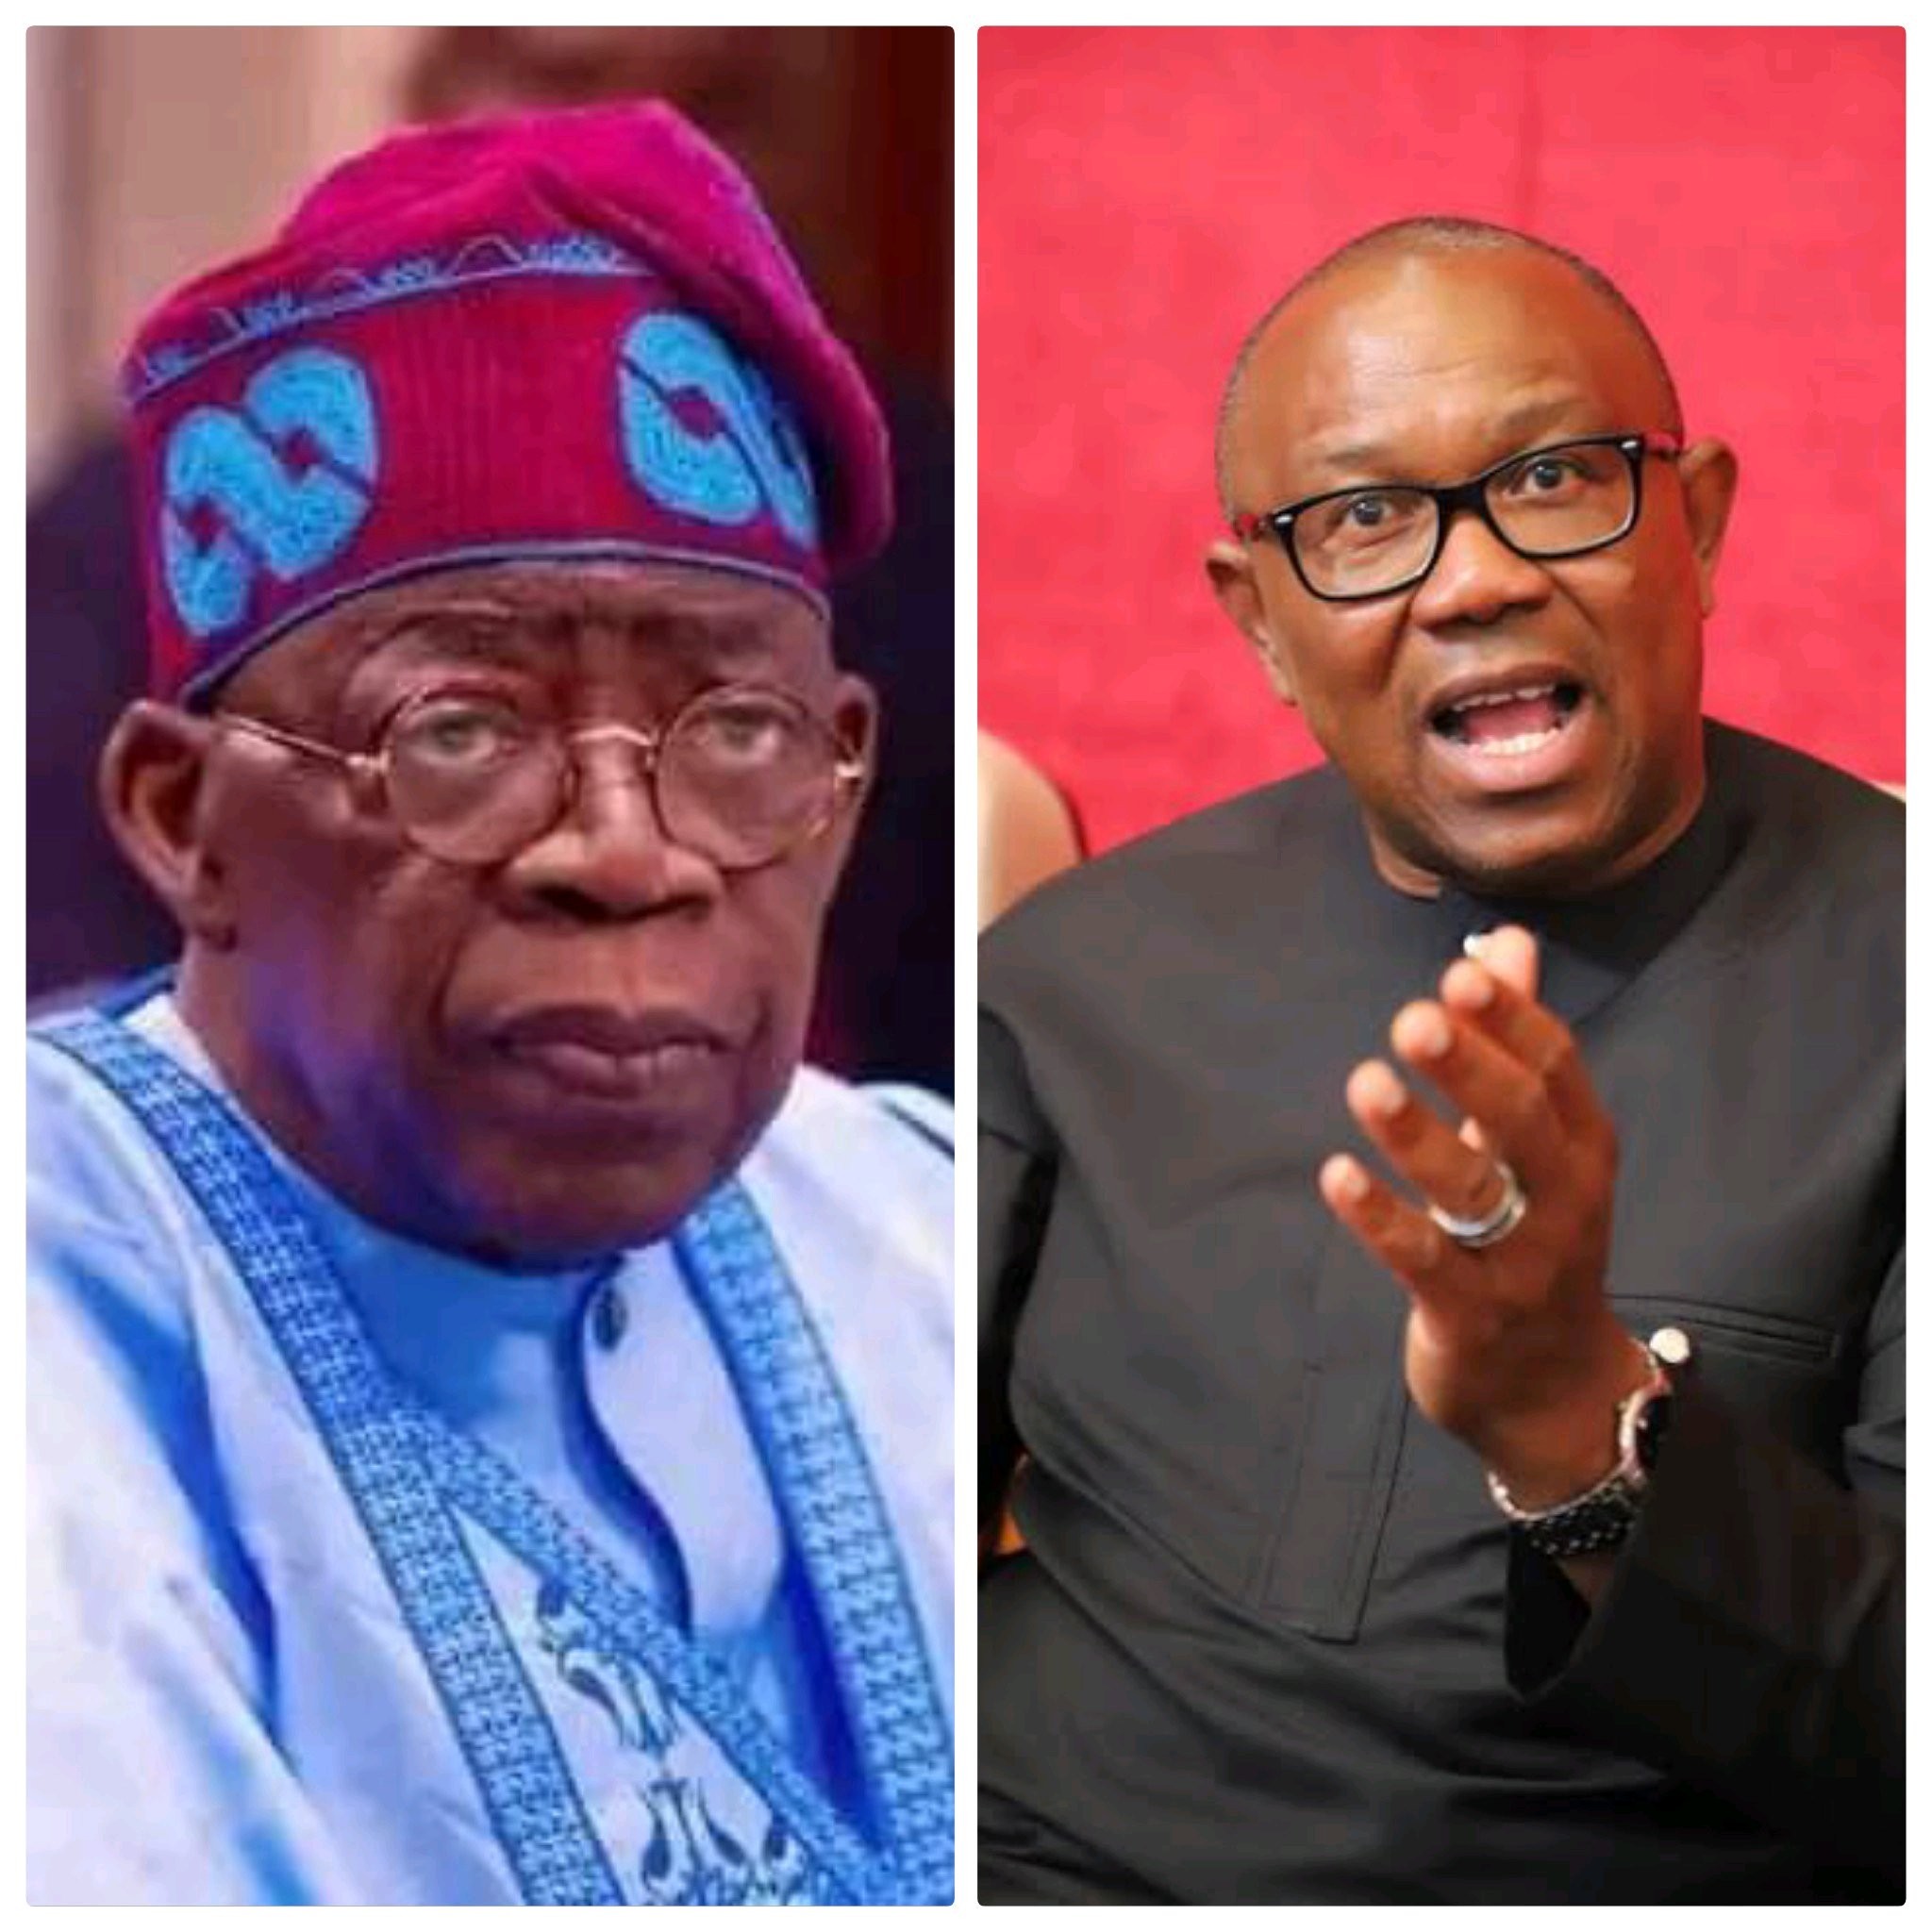 Stephen Akintayo said. "Obi might be too nice for Nigerians, there are a lot of tools to blackmail Obi compared to a Tinubu